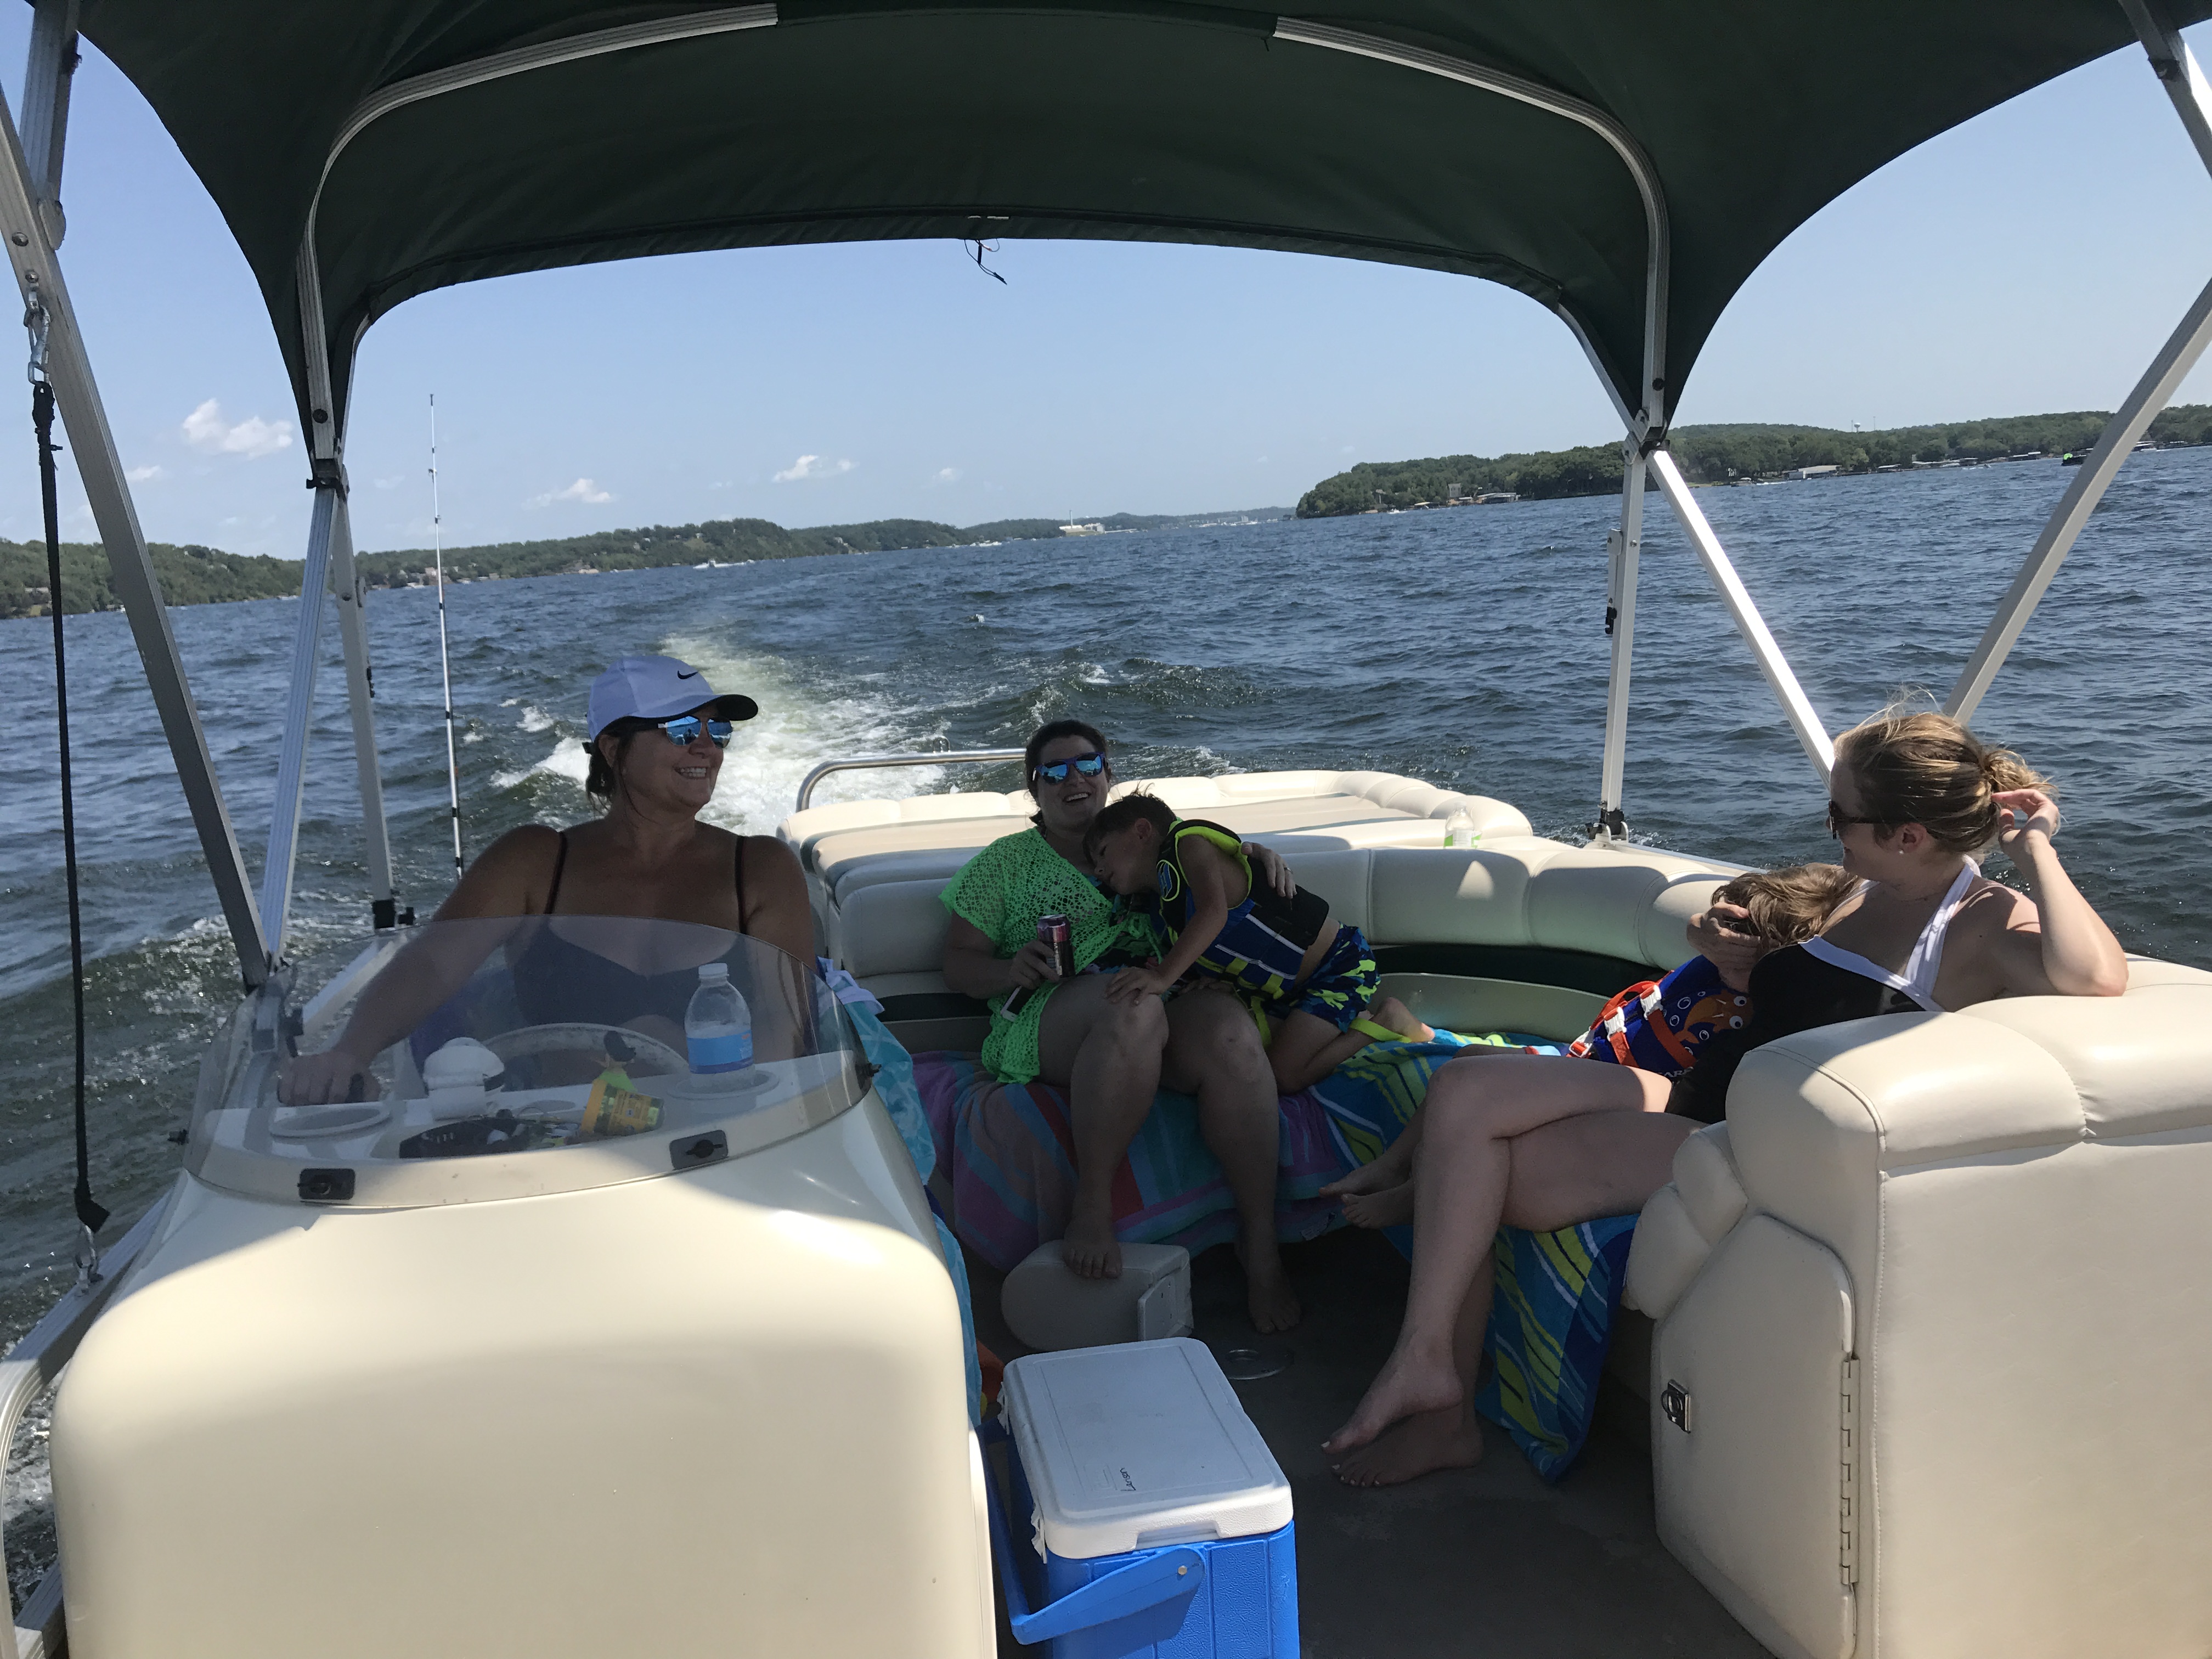 Family fun on the boat